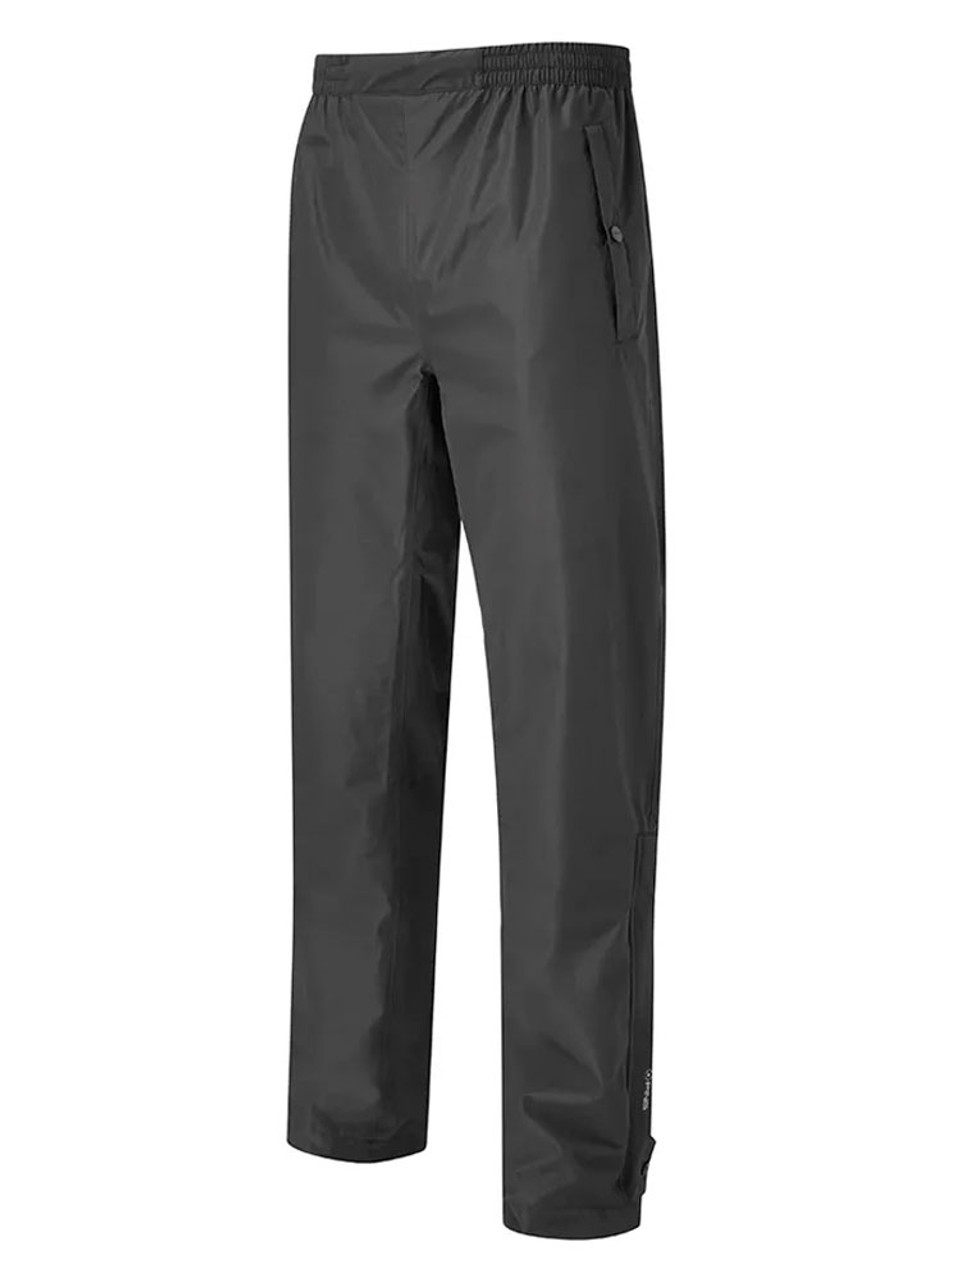 Amazoncouk Ping Golf Trousers For Men